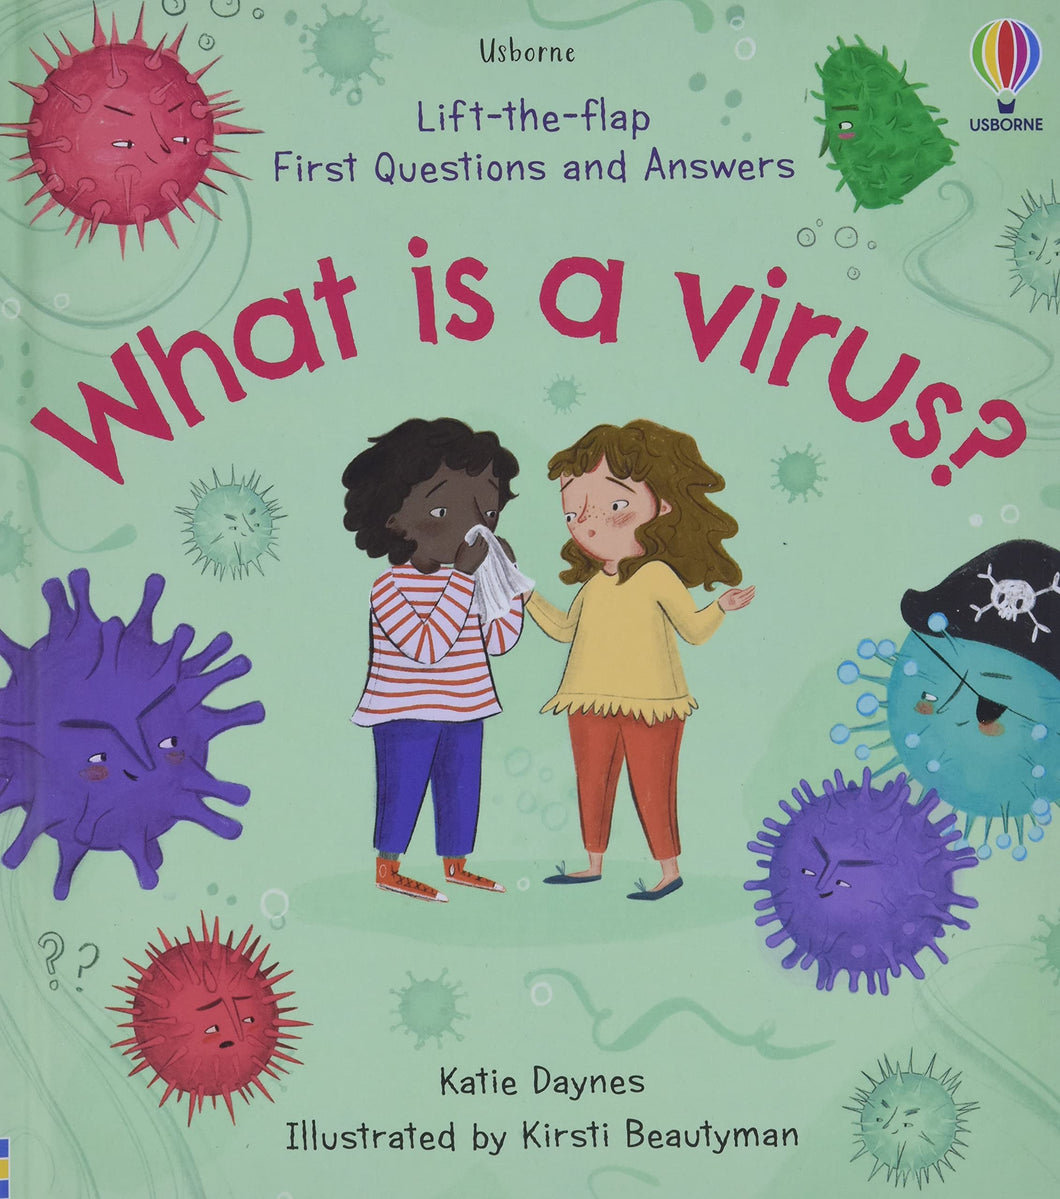 lift-the-flap first questions and answers what is a virus